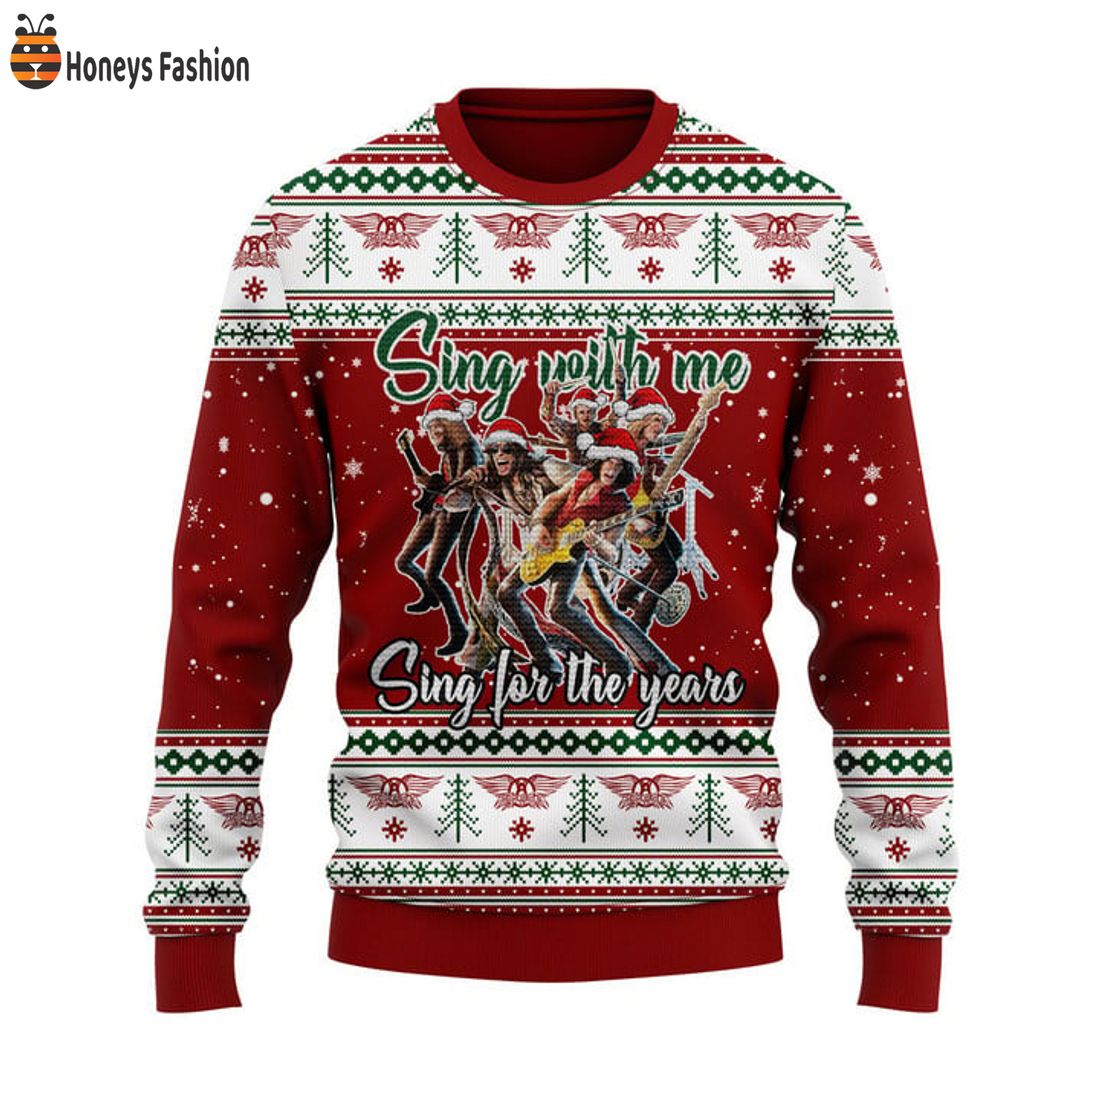 HOT Aerosmith Sing With Me Sing For The Years Ugly Christmas Sweater